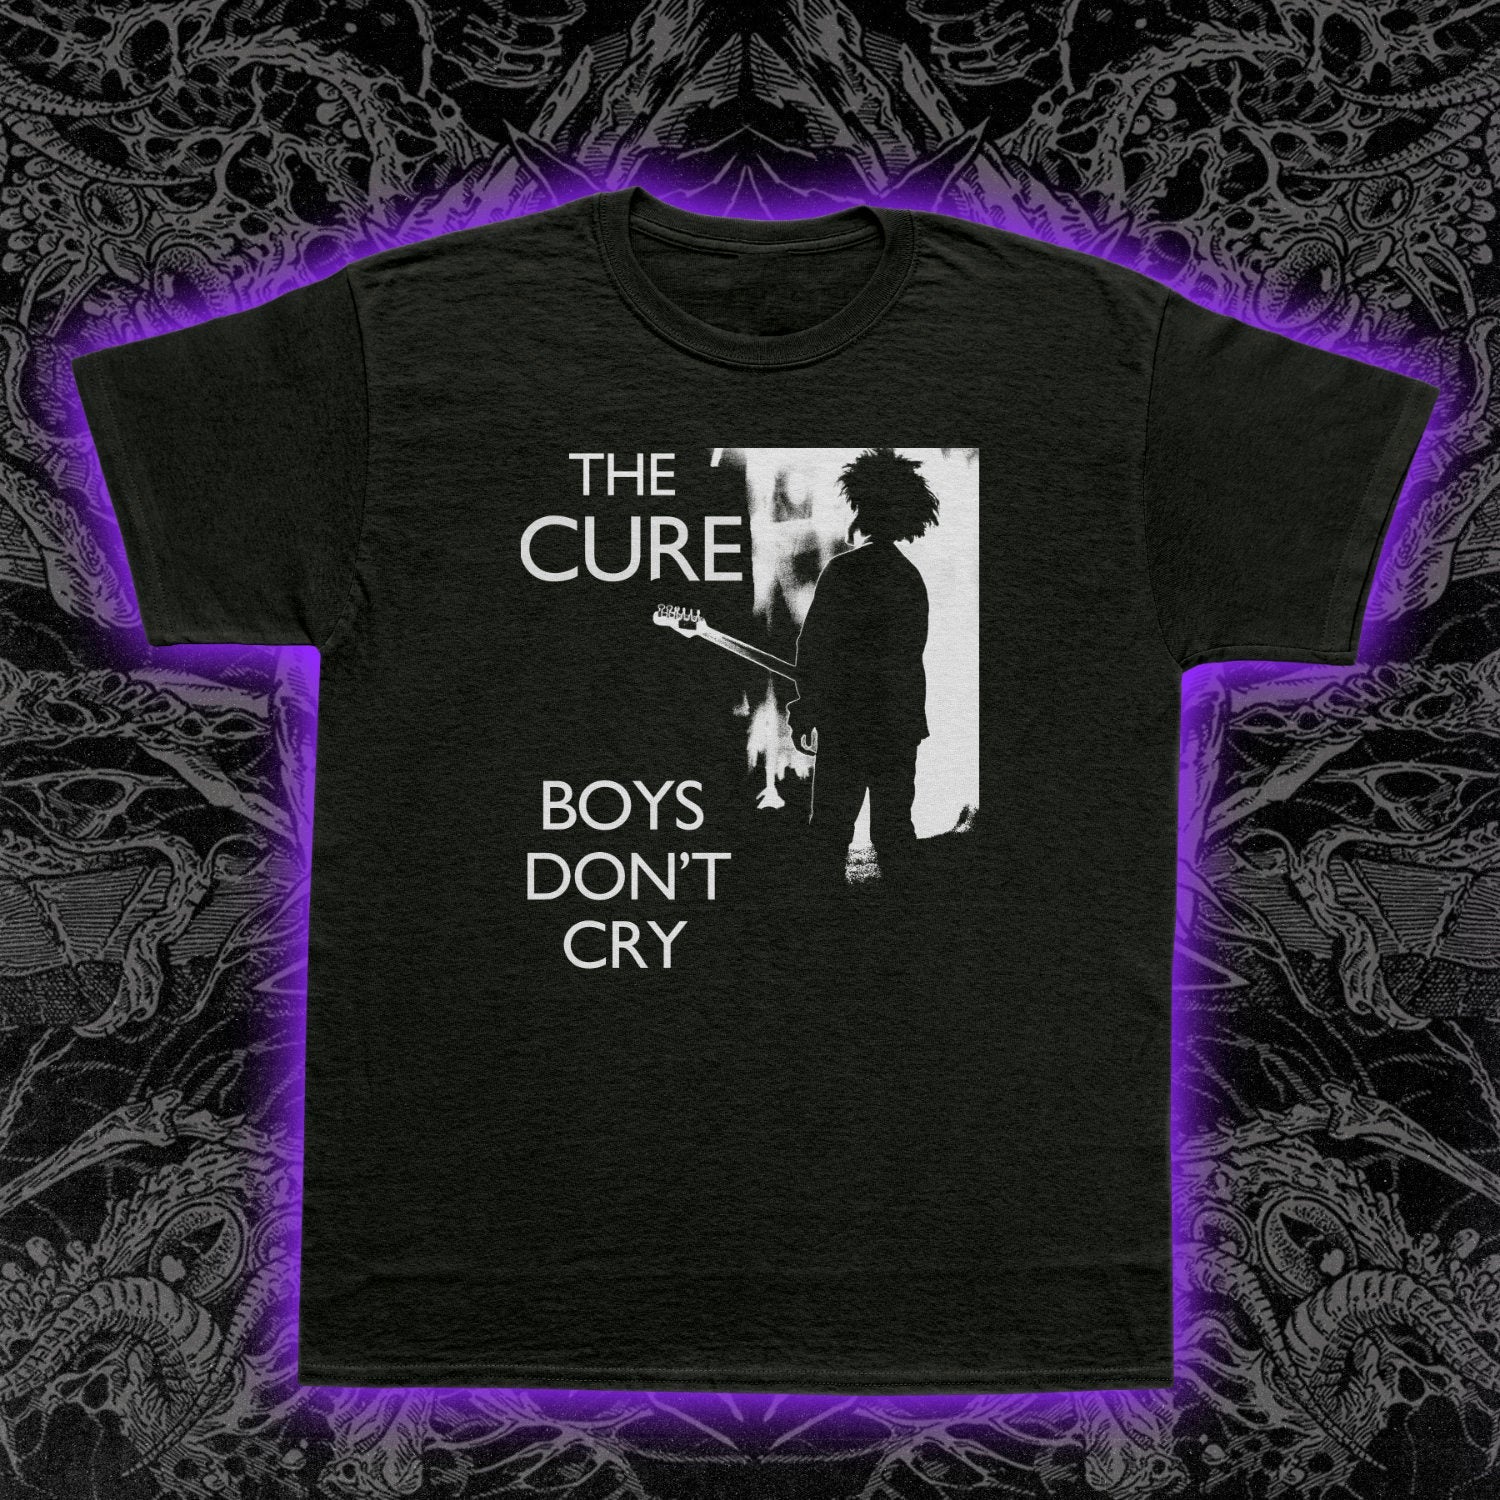 The Cure Boys Don't Cry Premium Tee